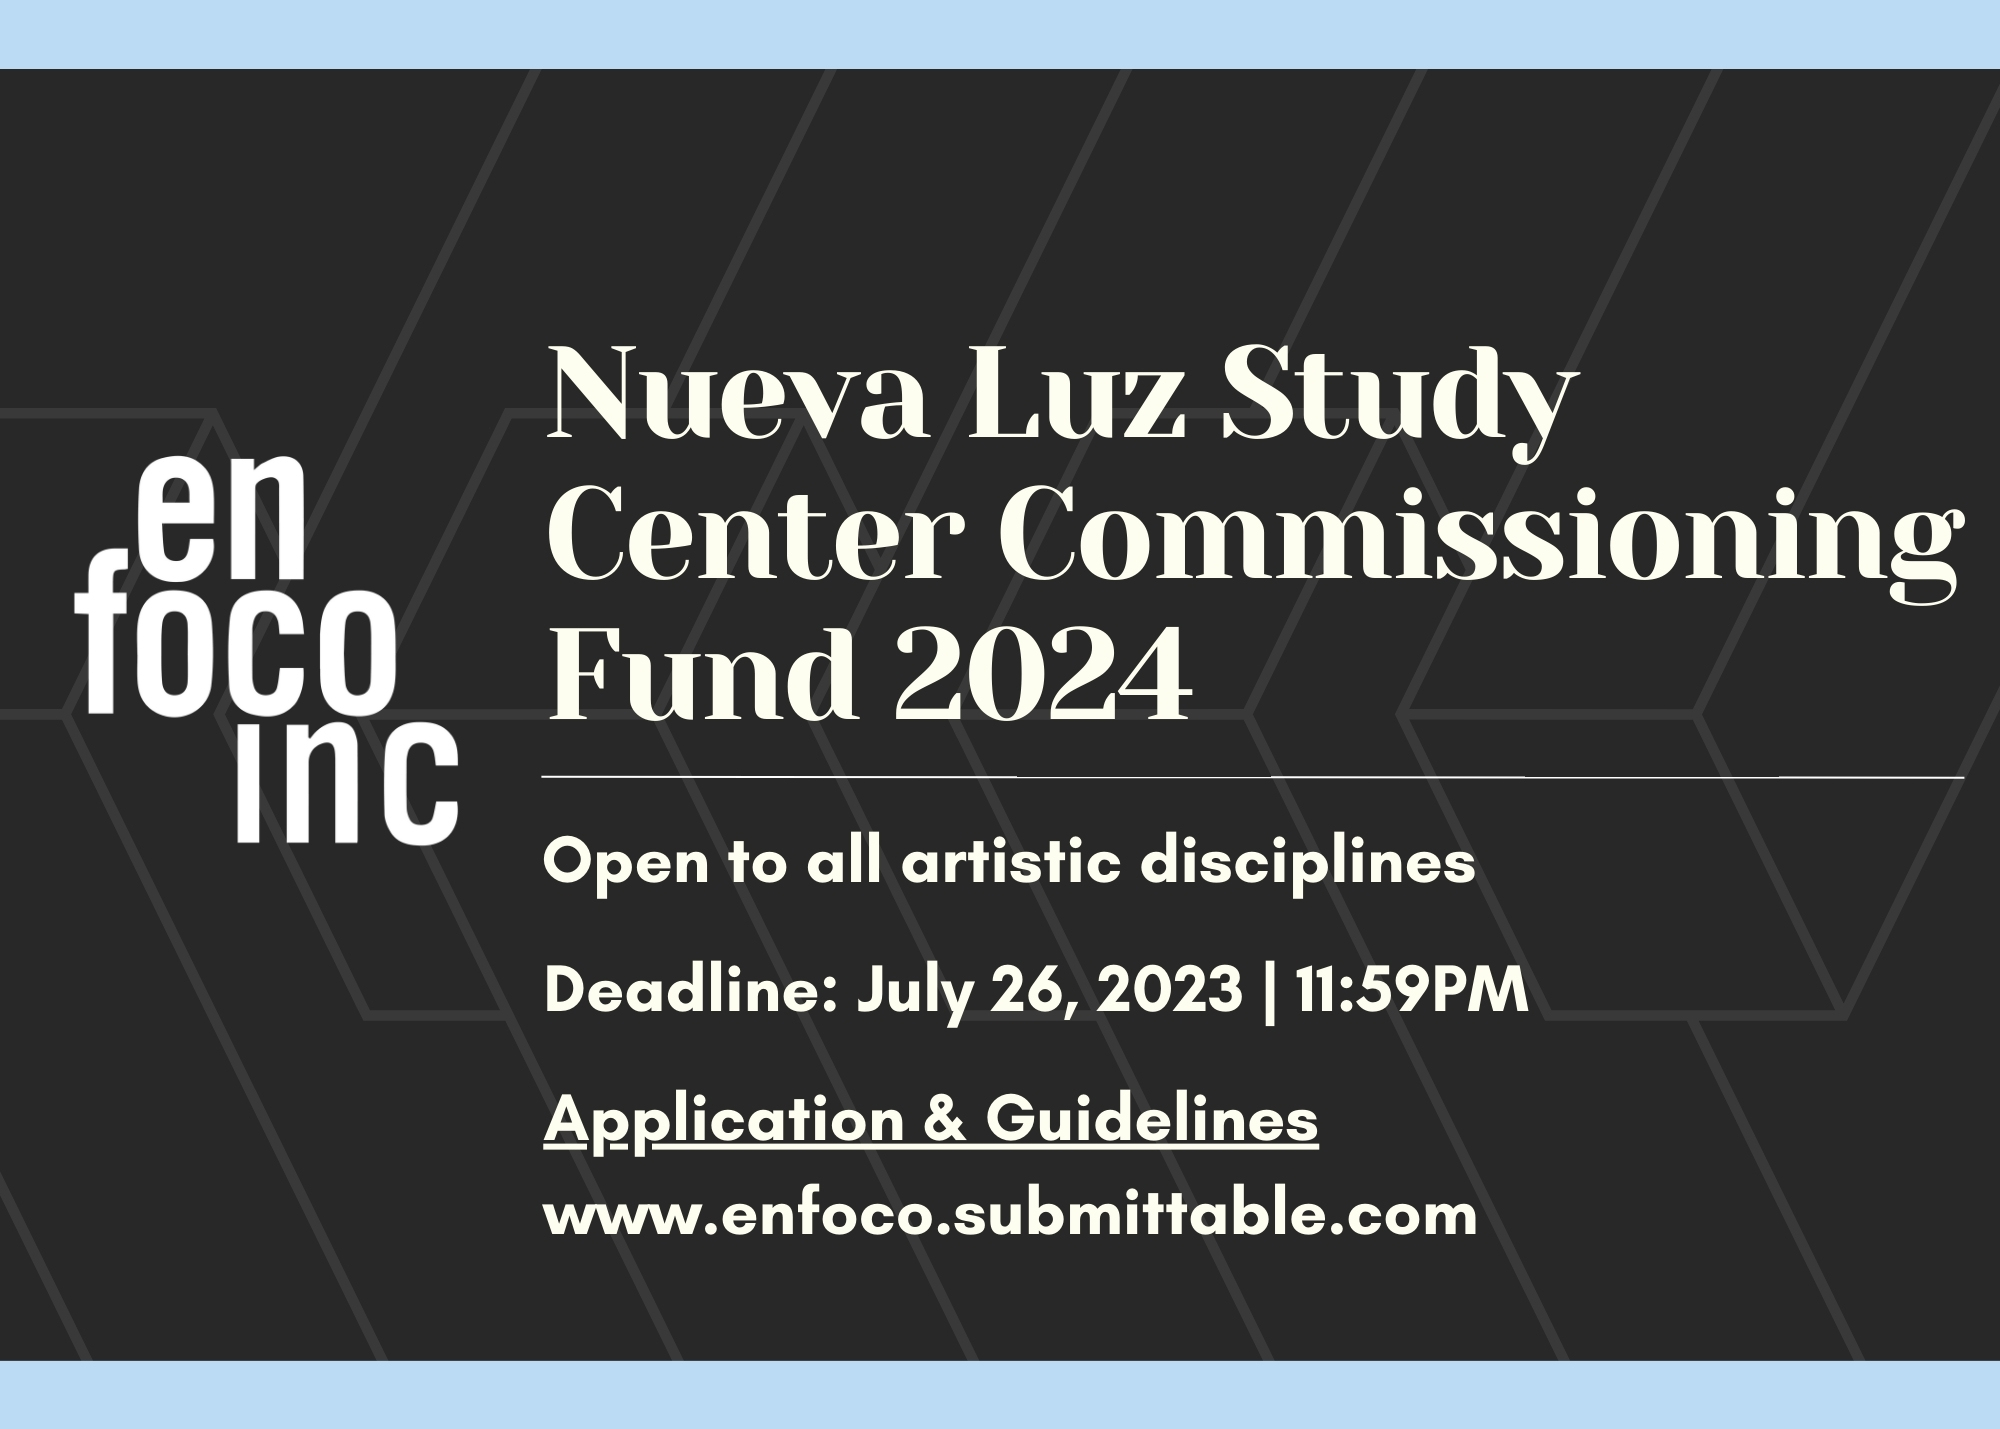 Copy of Nueva Luz Study Center Commissioning Banner